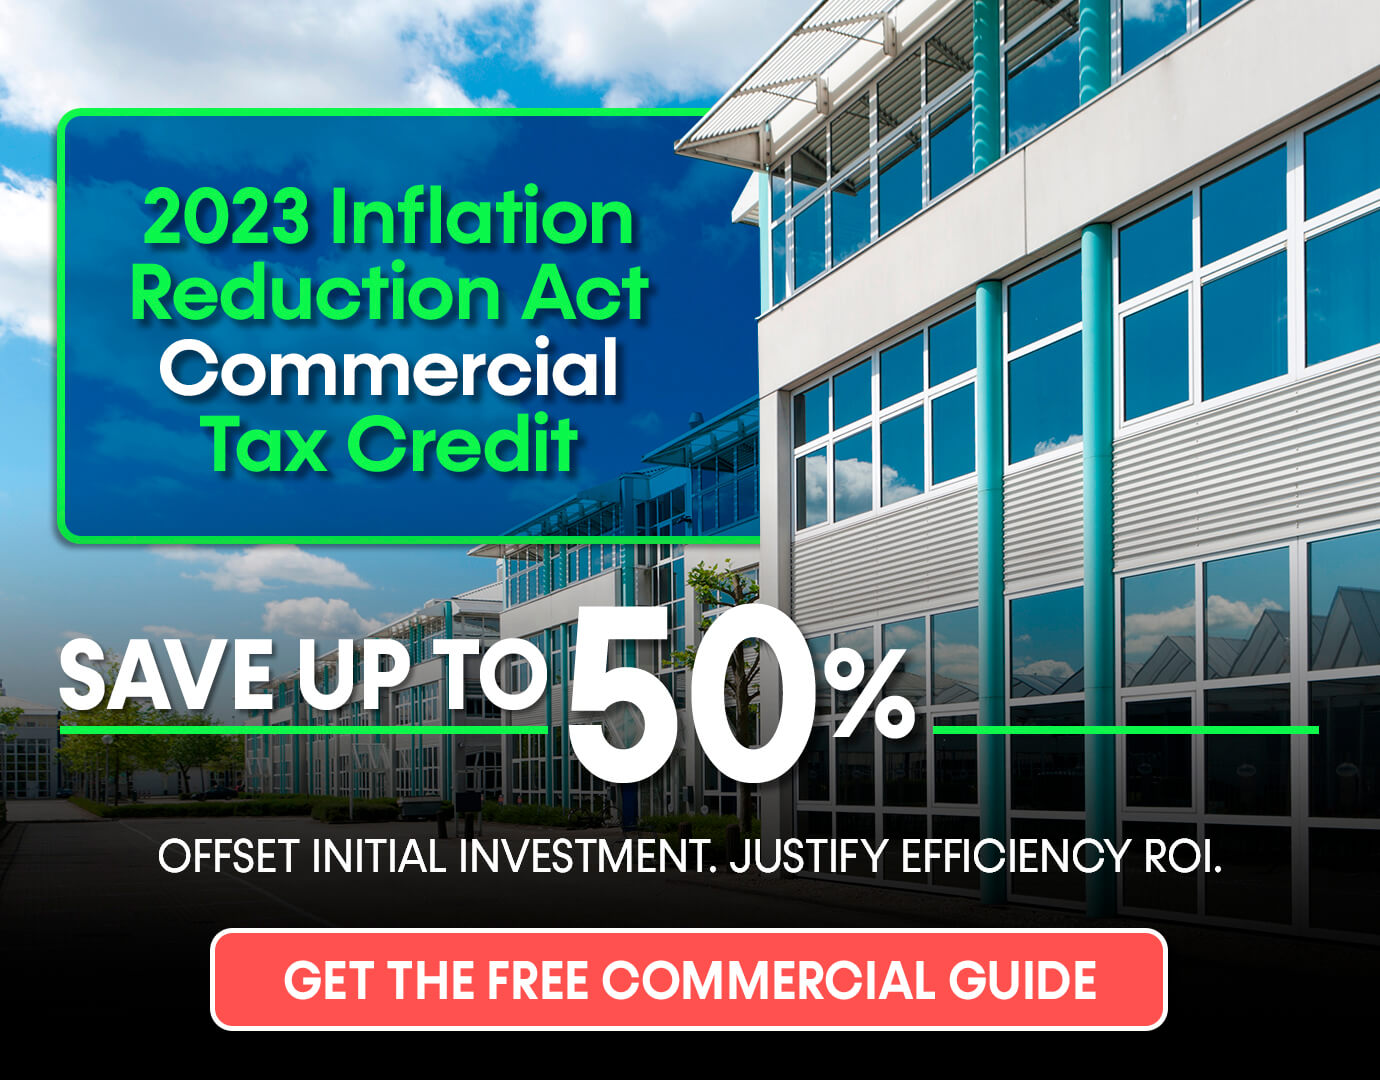 2023 Inflation Reduction Act (IRA) Commercial Tax Credit